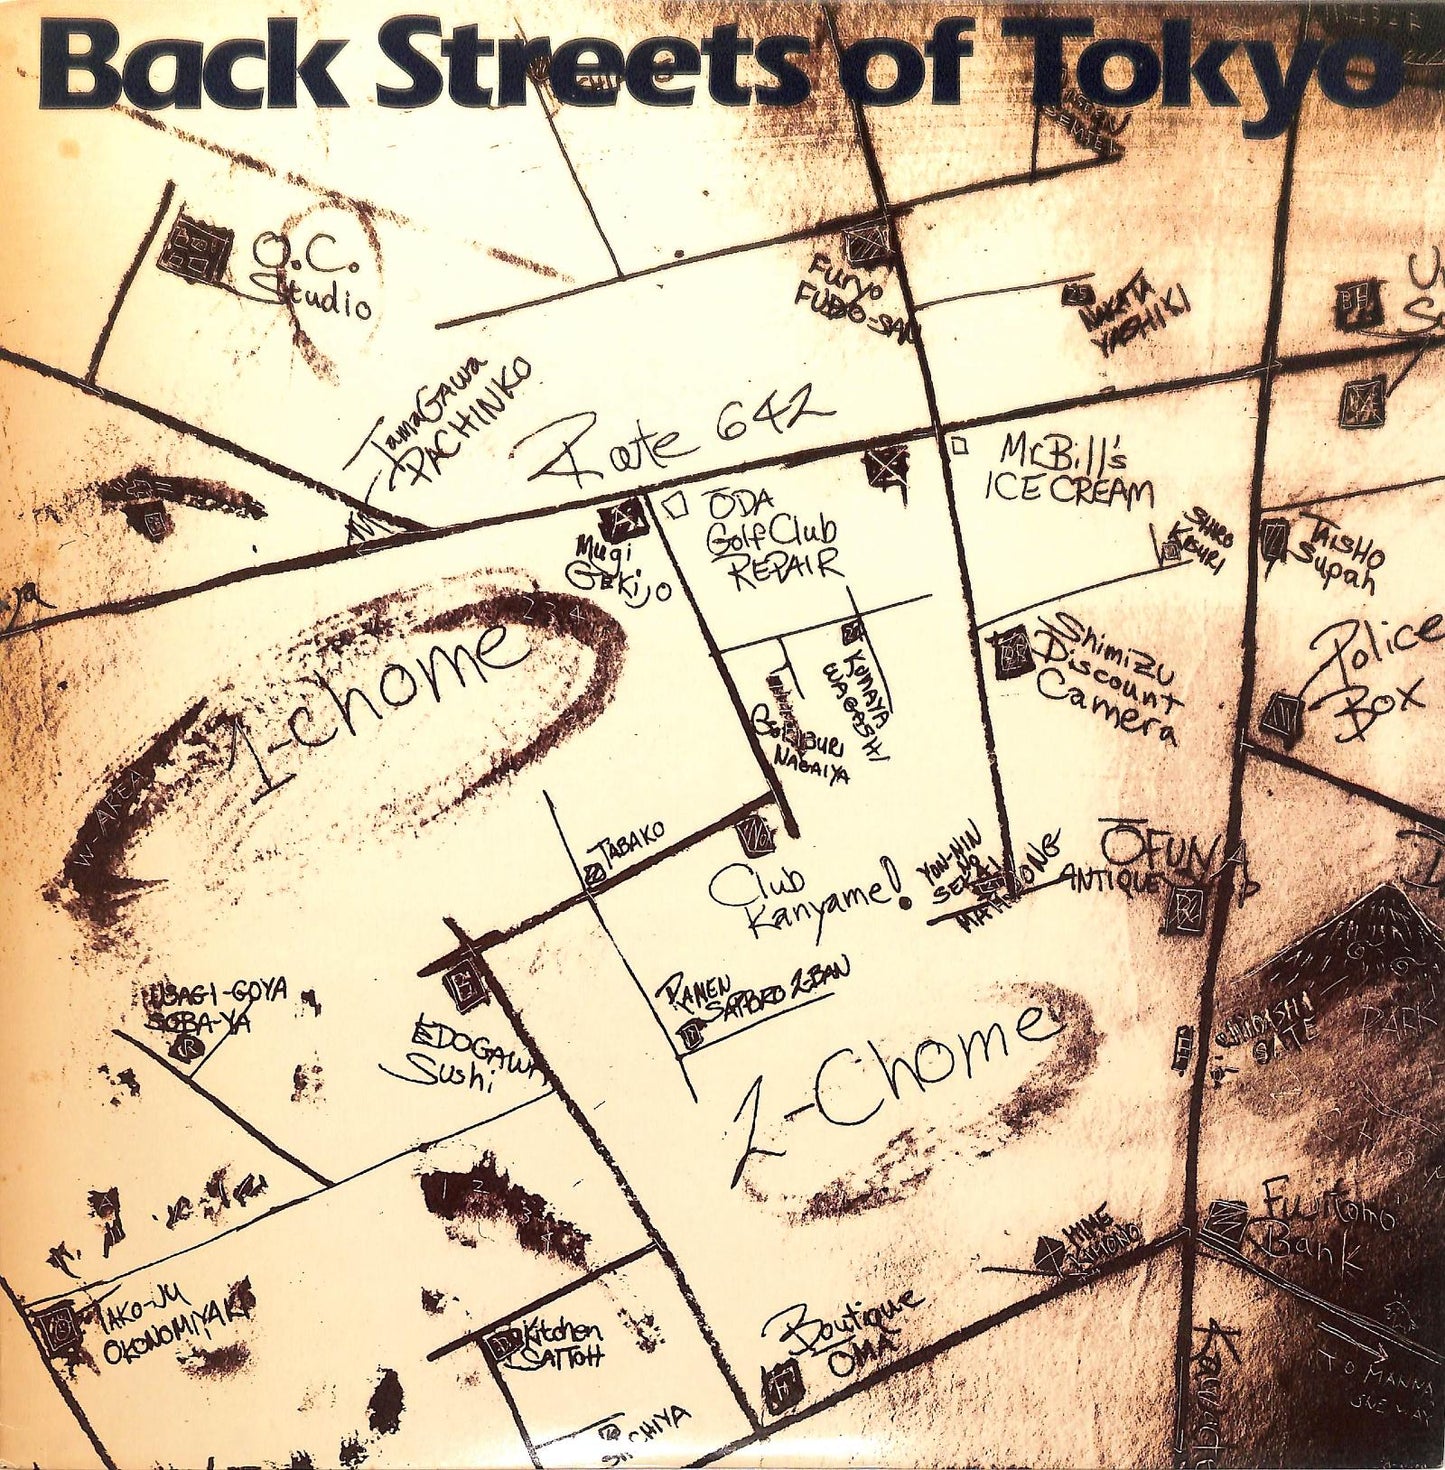 OFF COURSE - Back Streets Of Tokyo